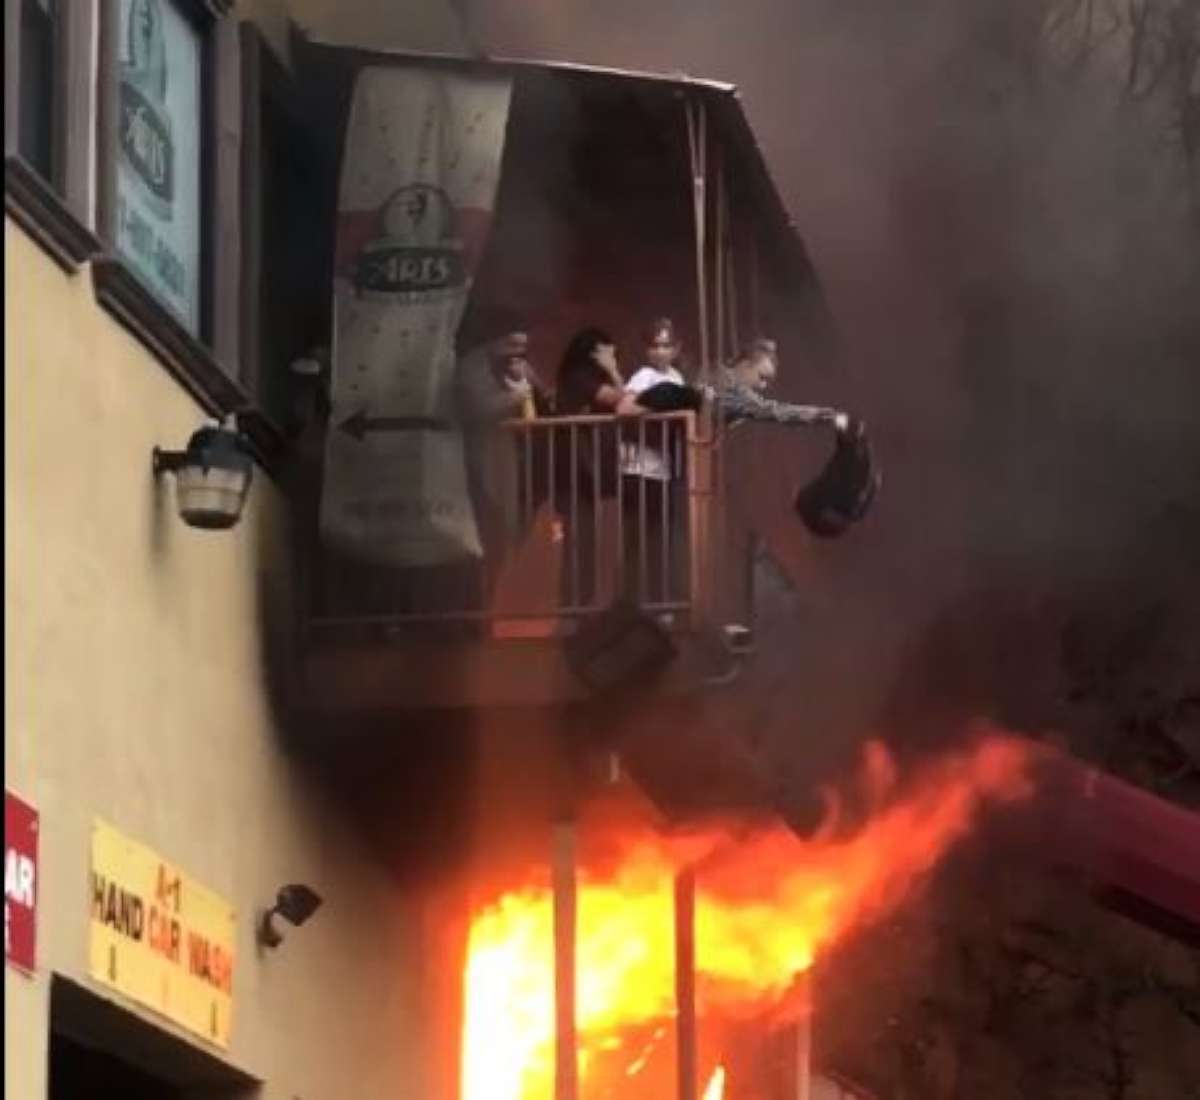 Members of a dance studio in Edgewater, N.J., were forced to flee from the second floor after the building went up in flames, Monday, April 9, 2018.